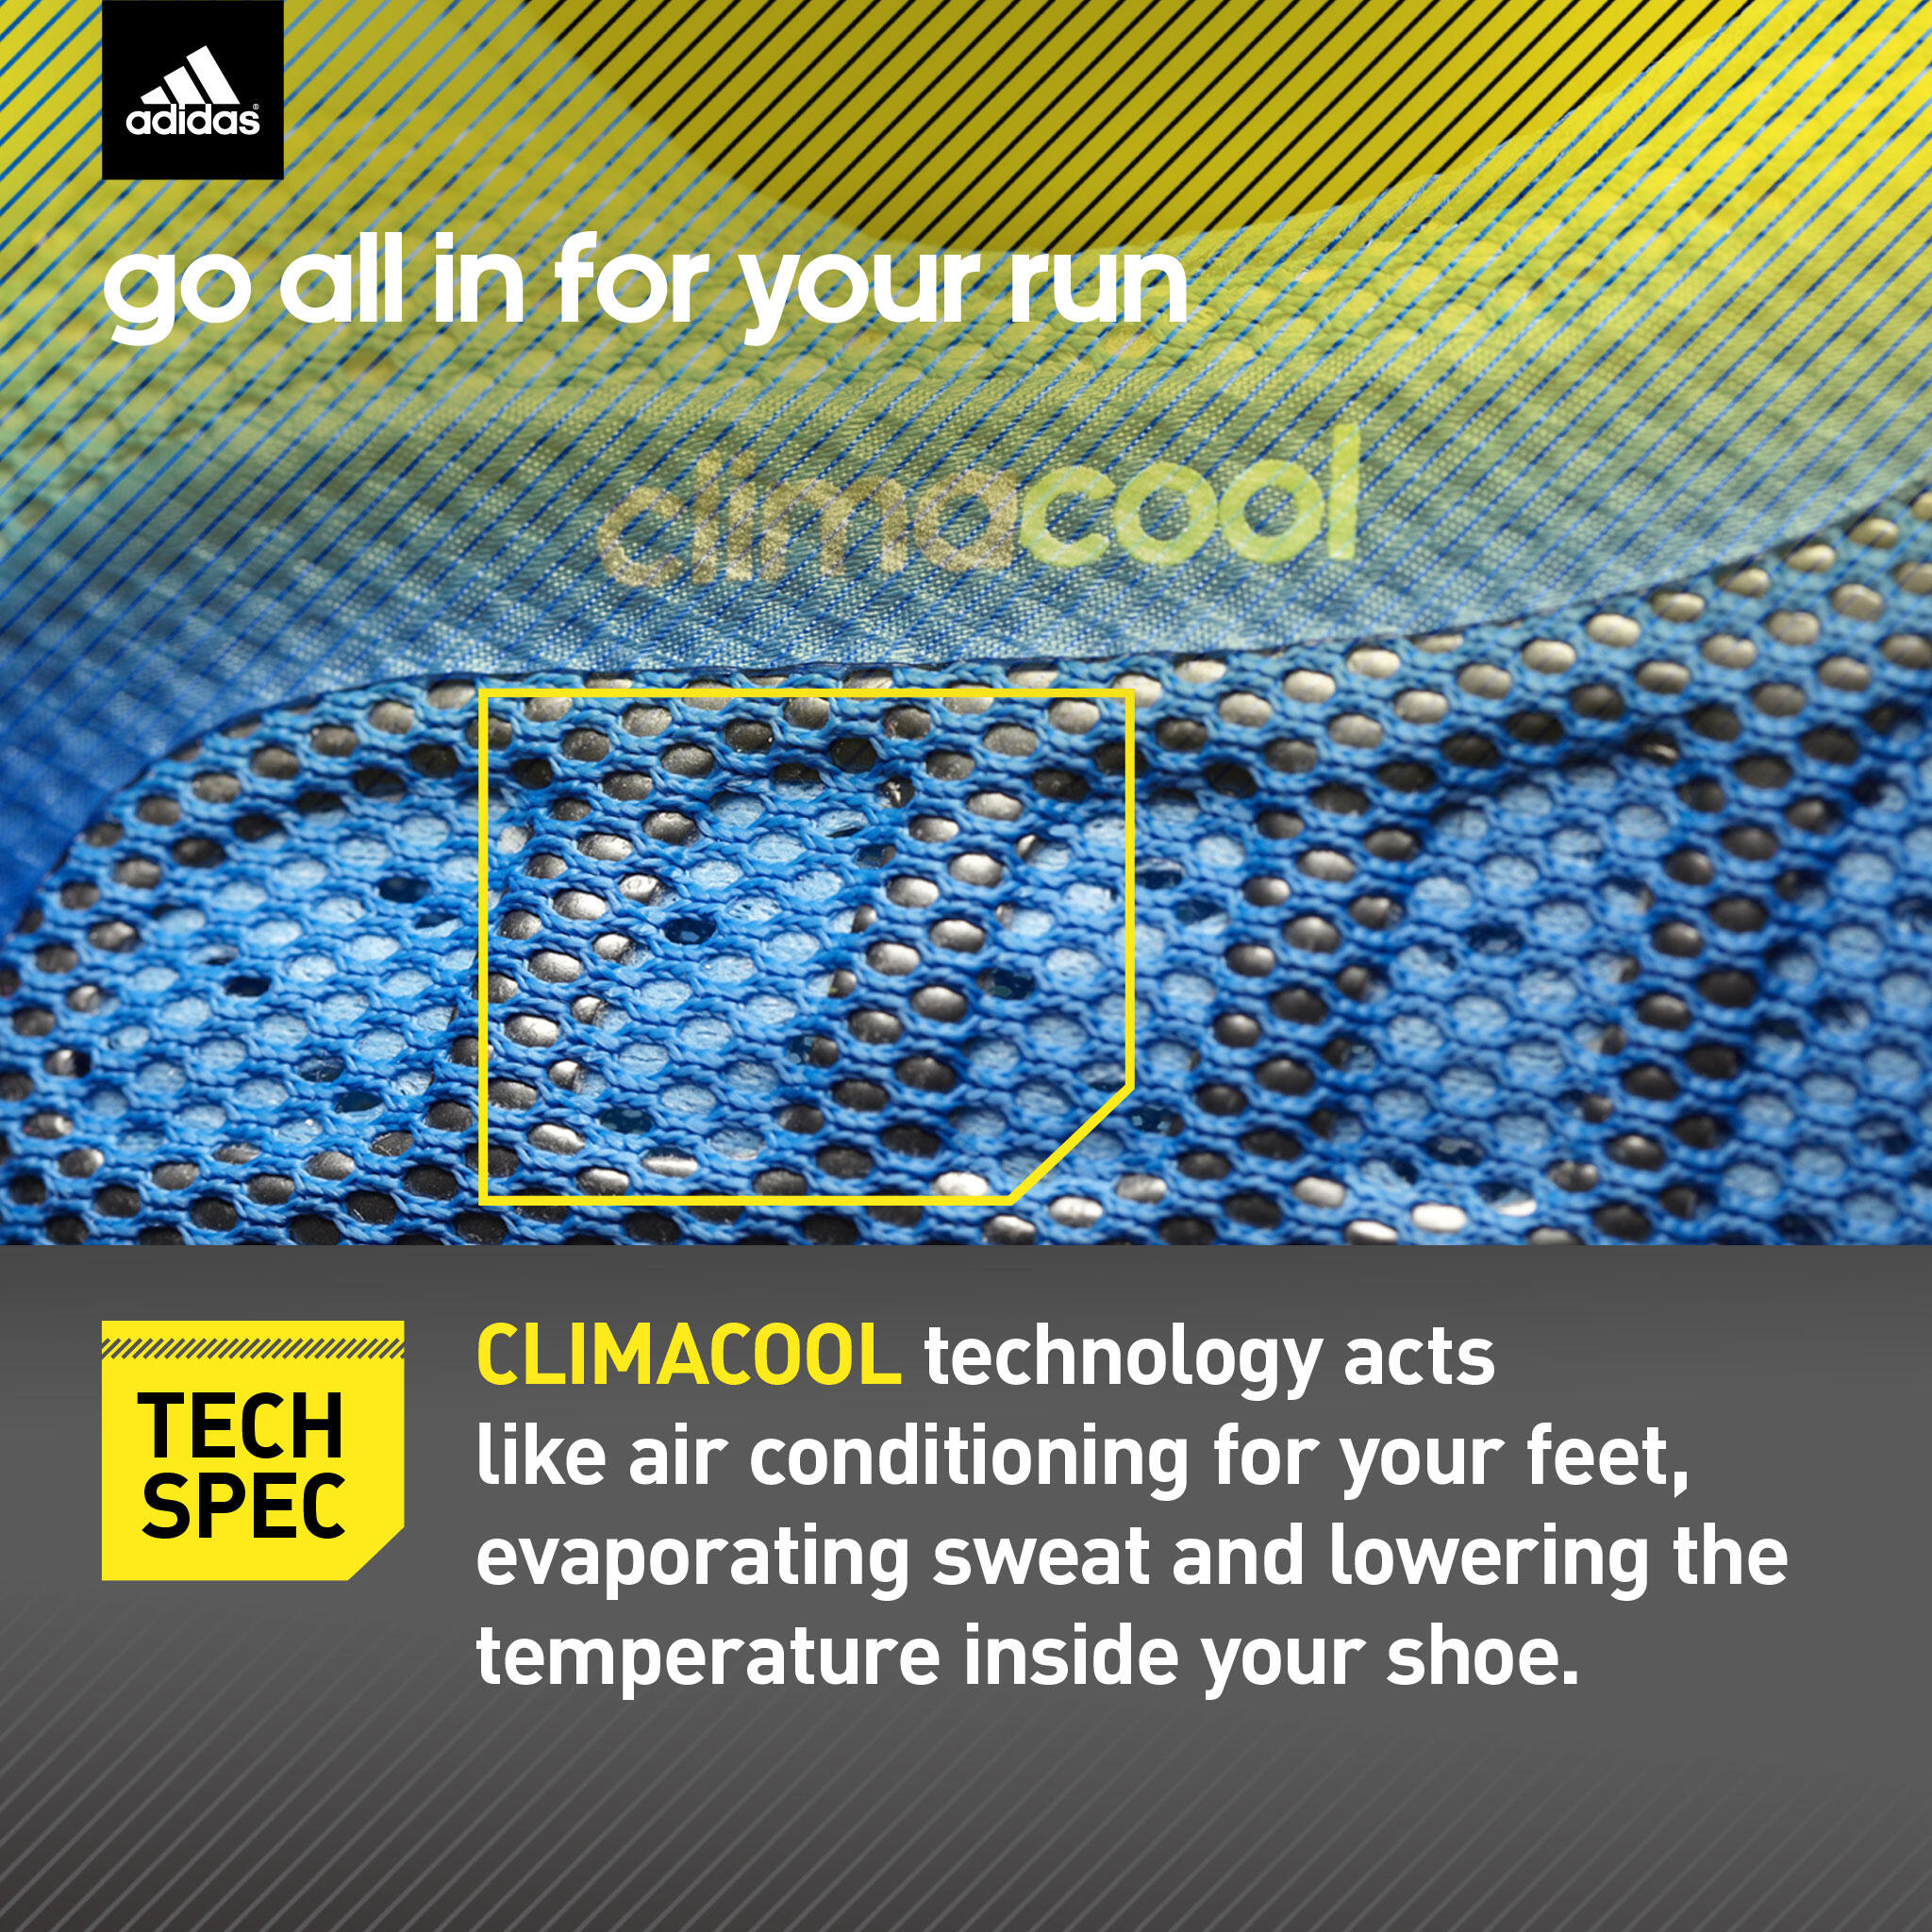 adidas Running on Twitter: COOL Climacool technology lets you stay cooler so you can run longer. Hit LIKE if you're all in for a cooler run. http://t.co/r429U4ffi2" / Twitter